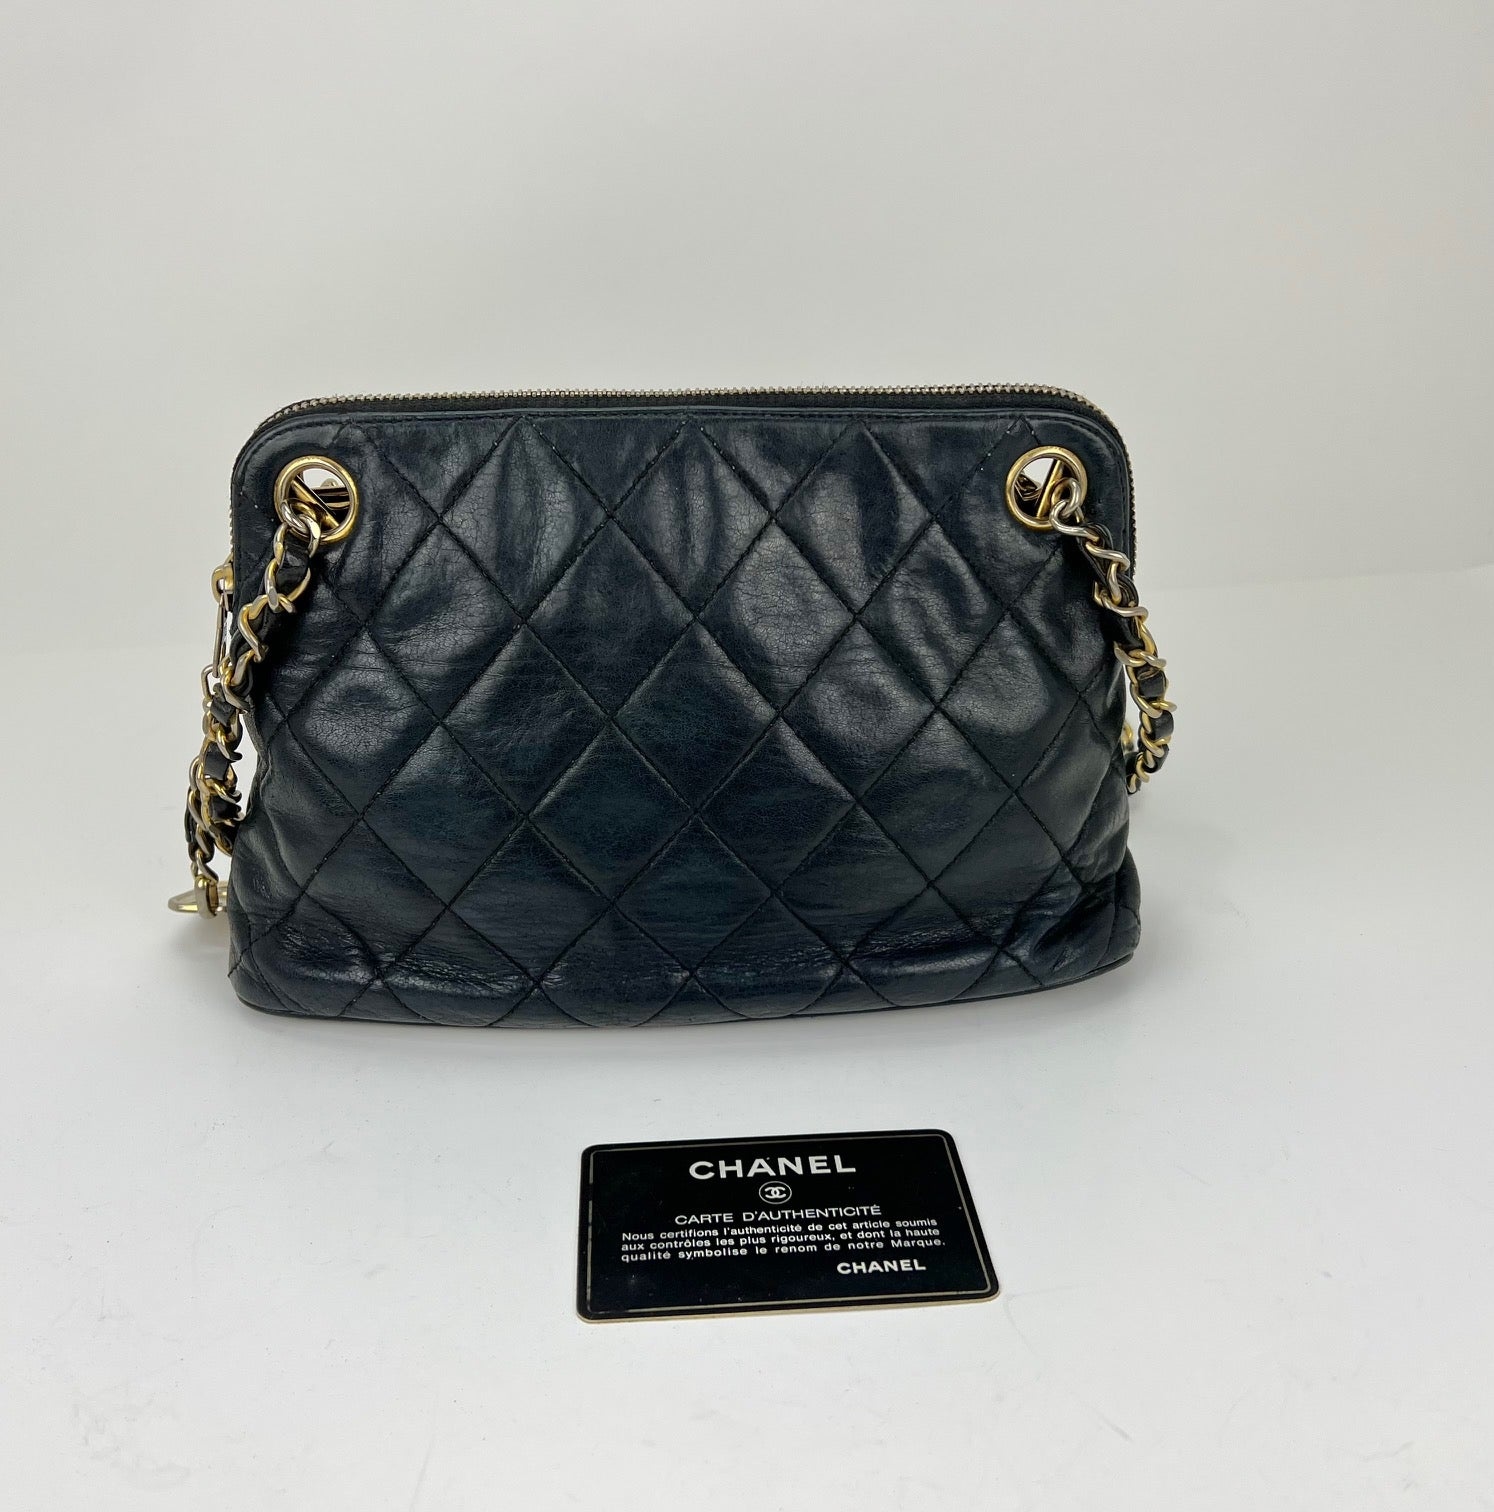 CHANEL Bag Quilted Lambskin Leather Chain Vintage Black Mini Shoulder Bag Preowned - 6